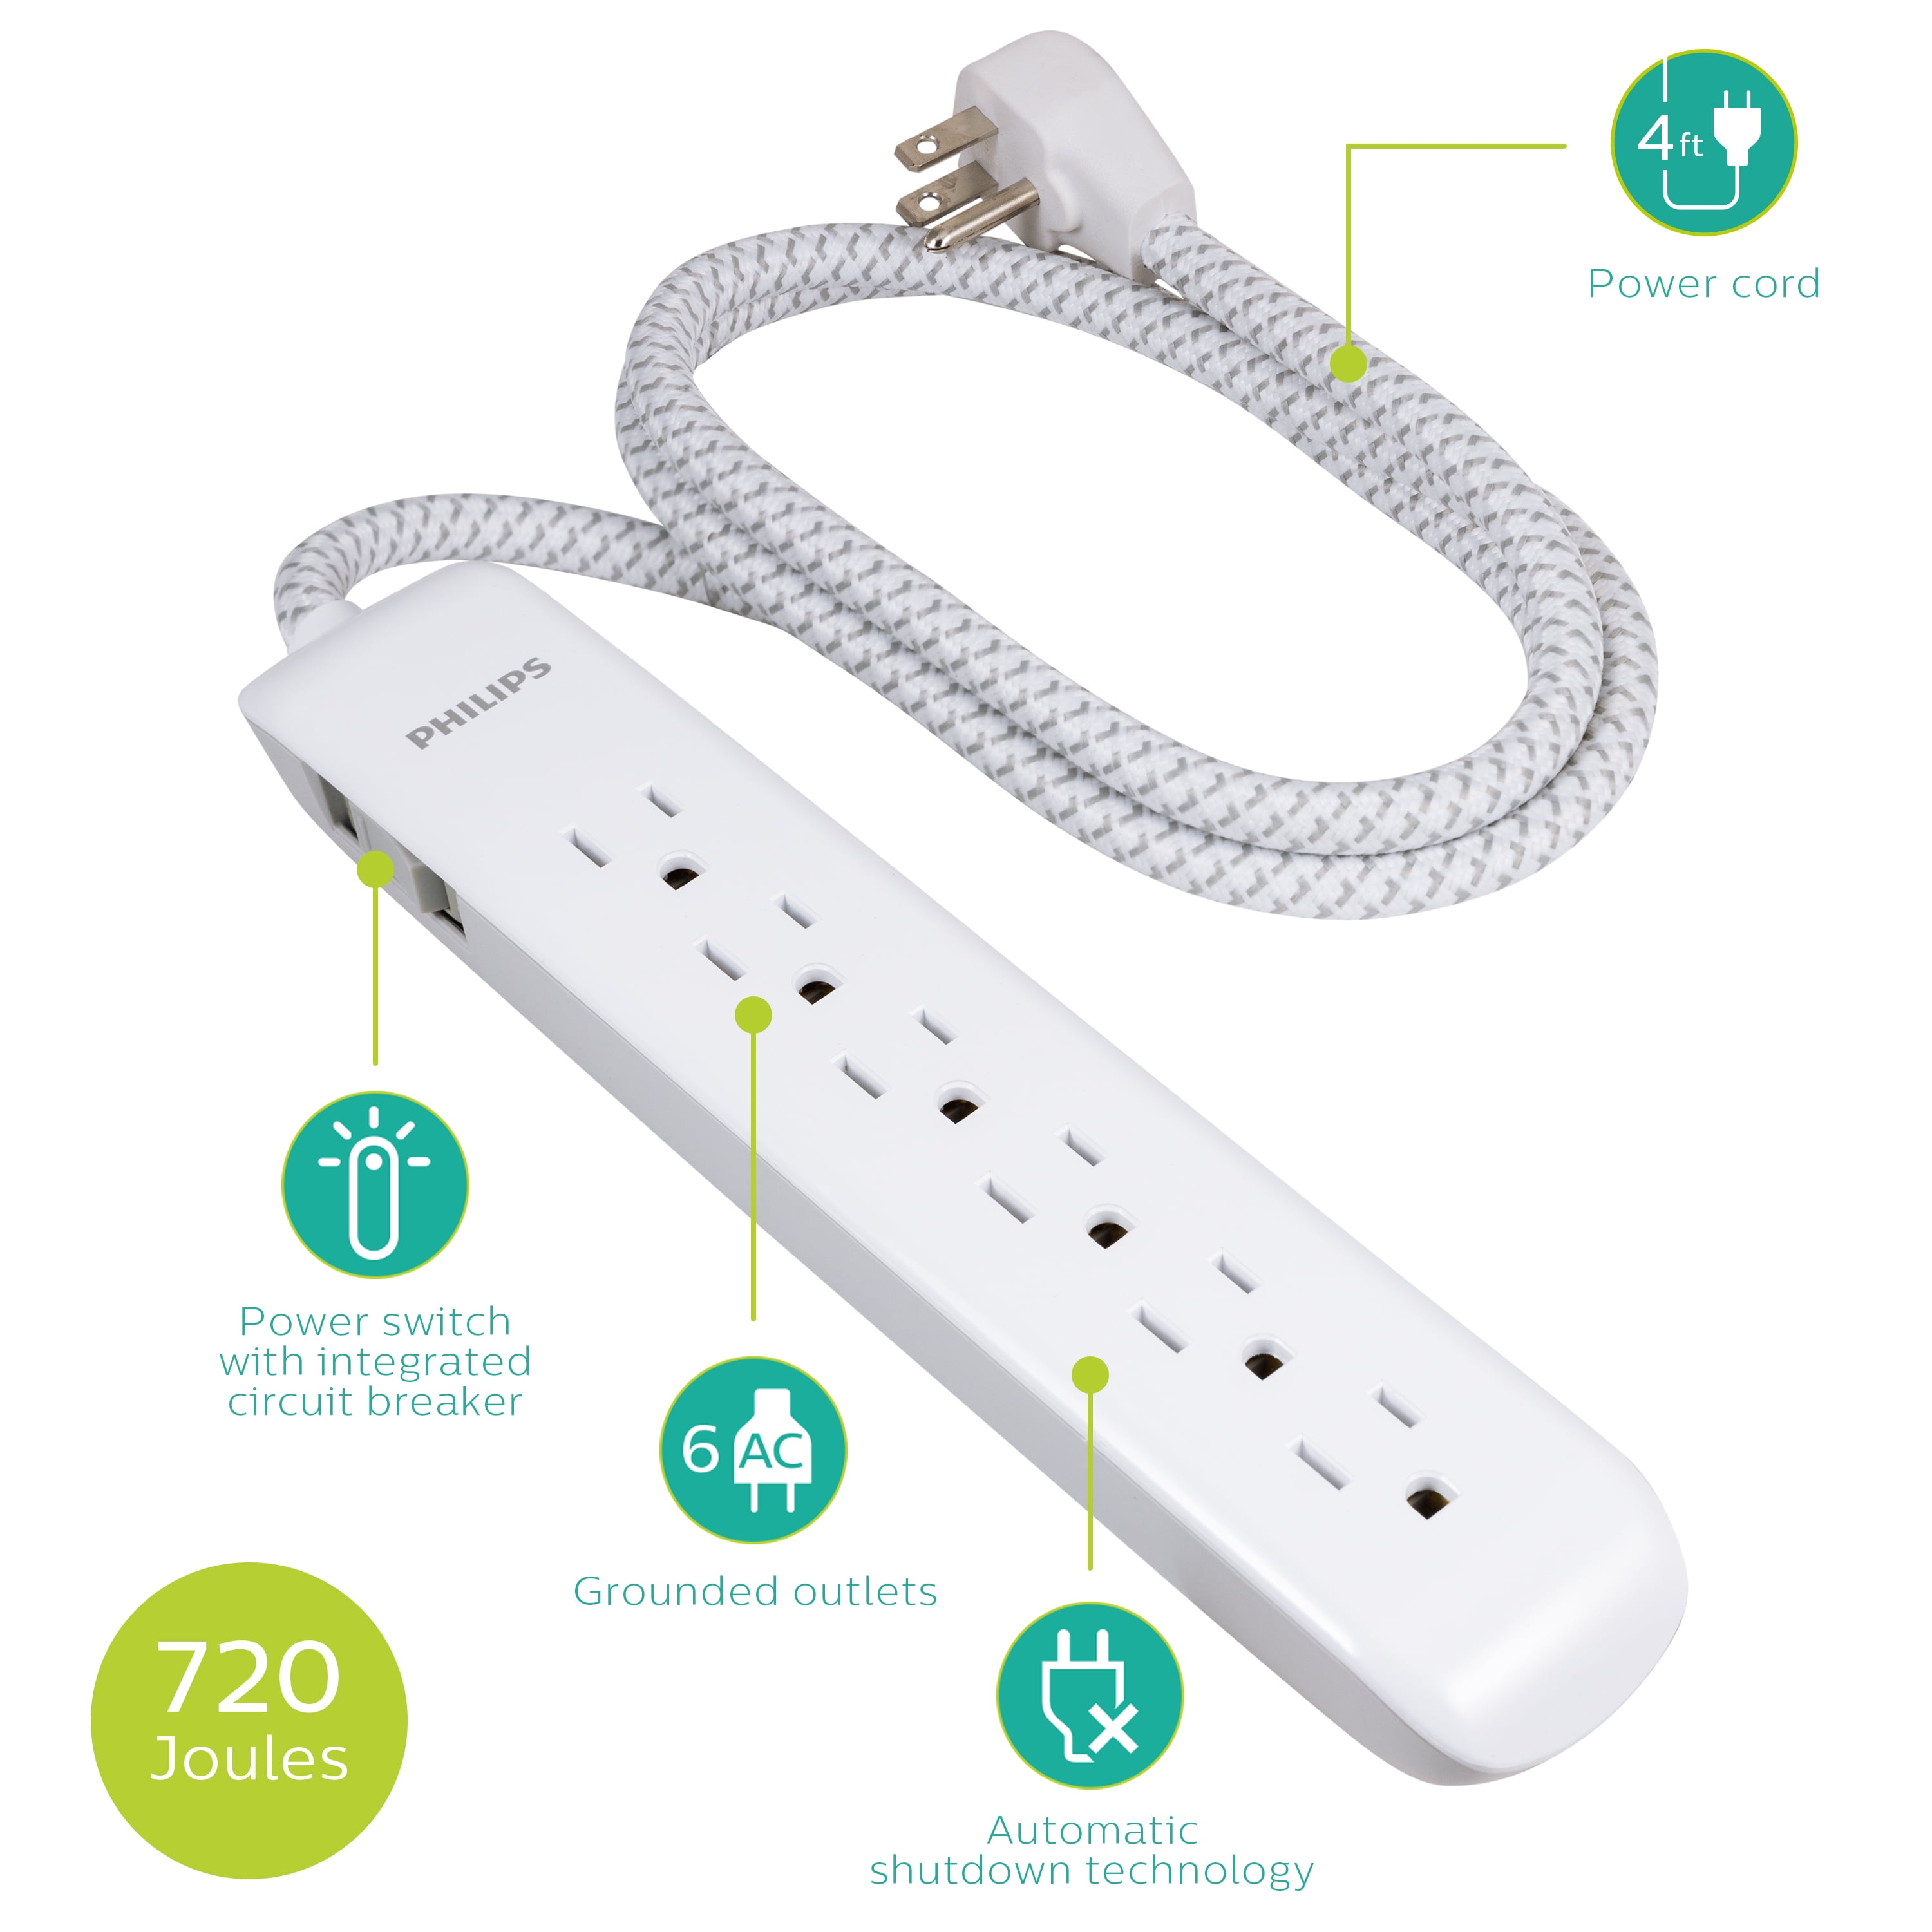 2 New Belkin 6 Outlet Surge Protector 720 Joules Plug Switch with 4ft Cord White 